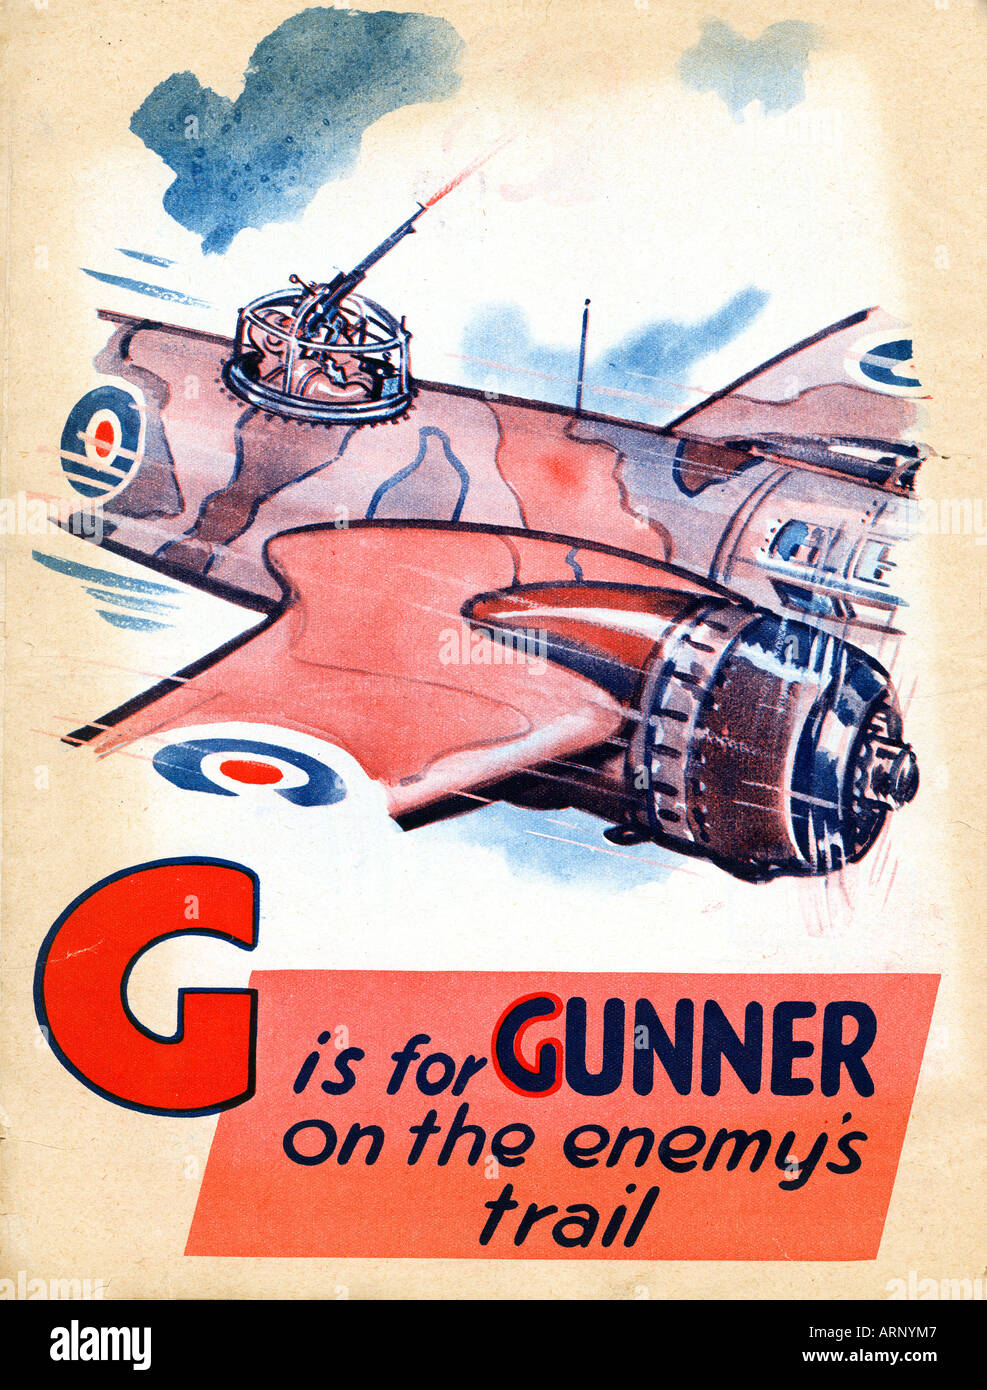 Battle of Britain G is for Gunner on the enemys trail British childrens alphabet book from WW II Stock Photo